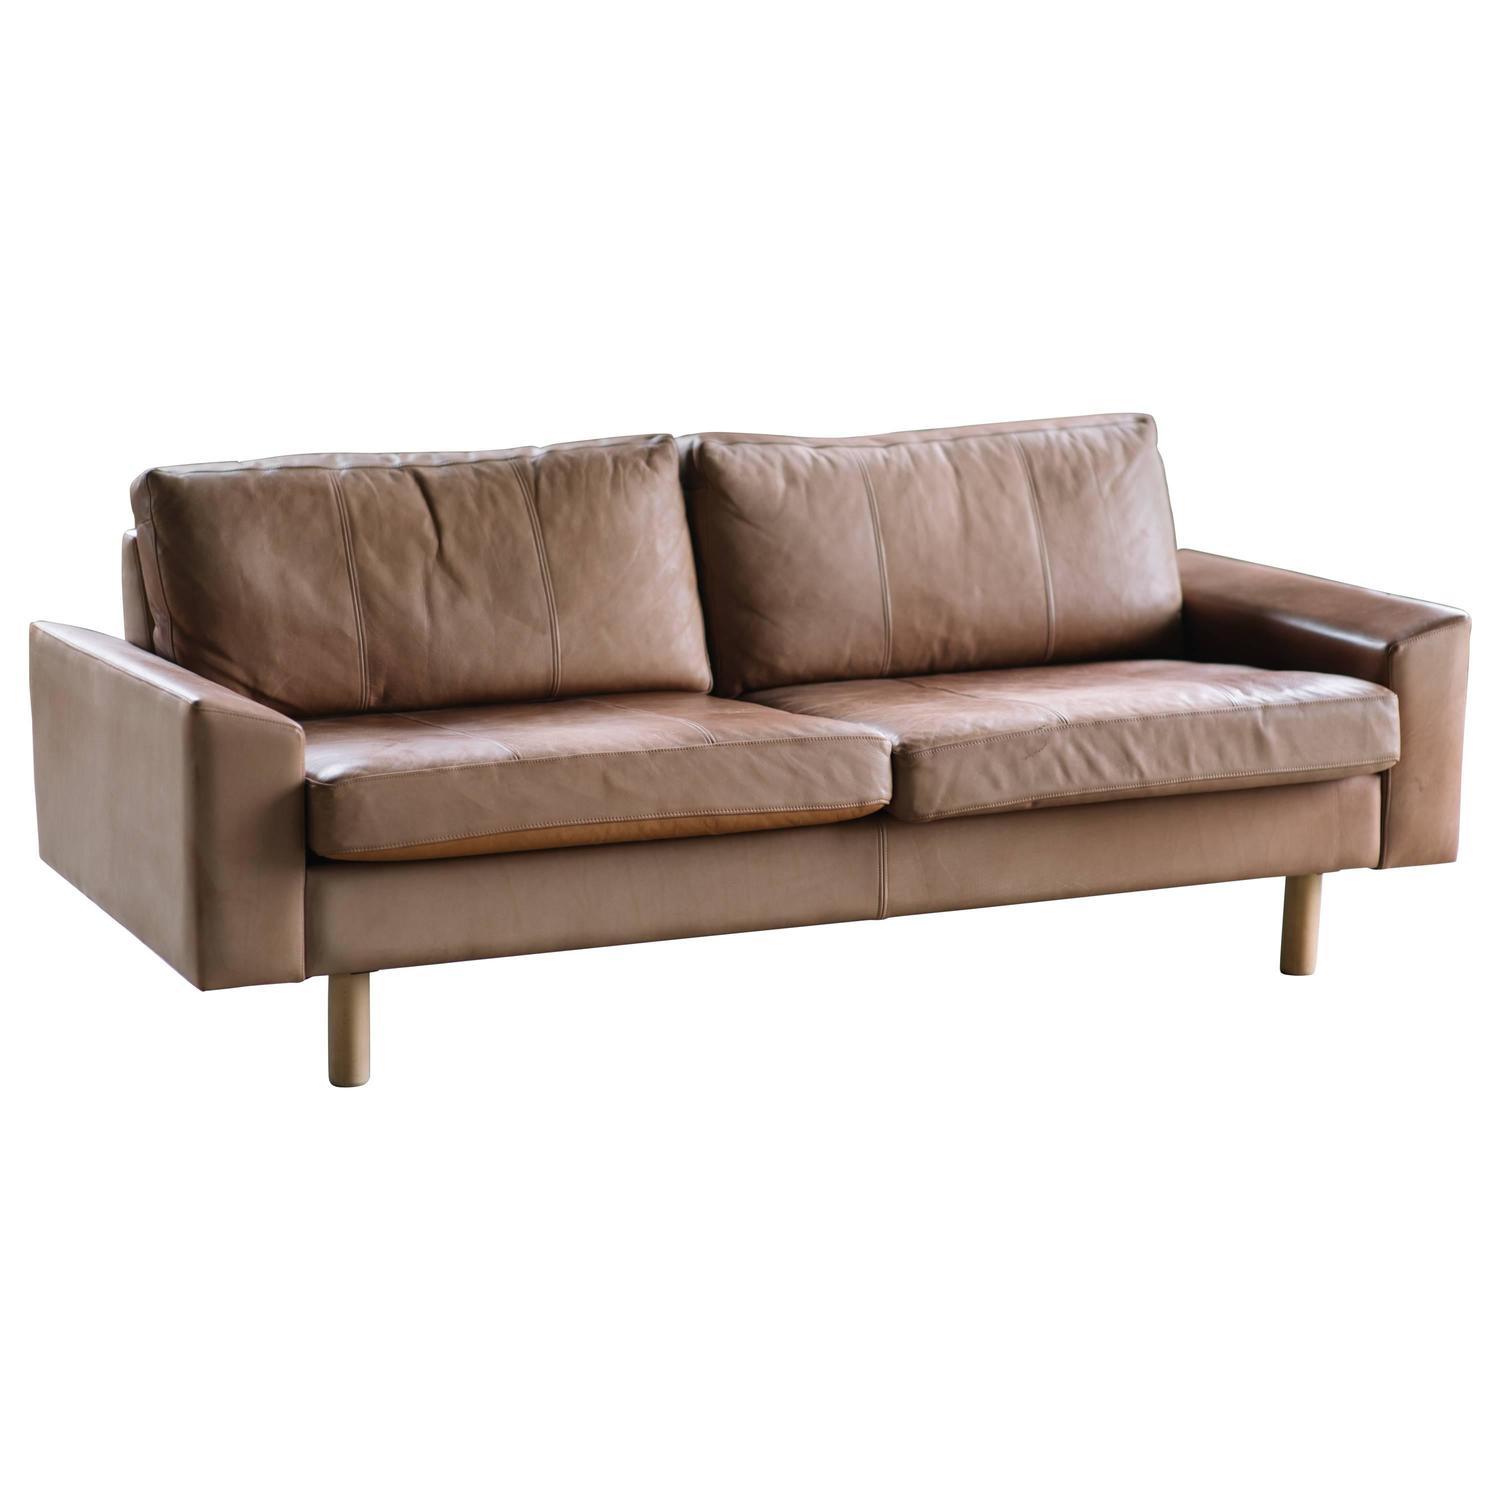 Leather Sofa by Illums Bolighus with Tan Sand Colored Leather